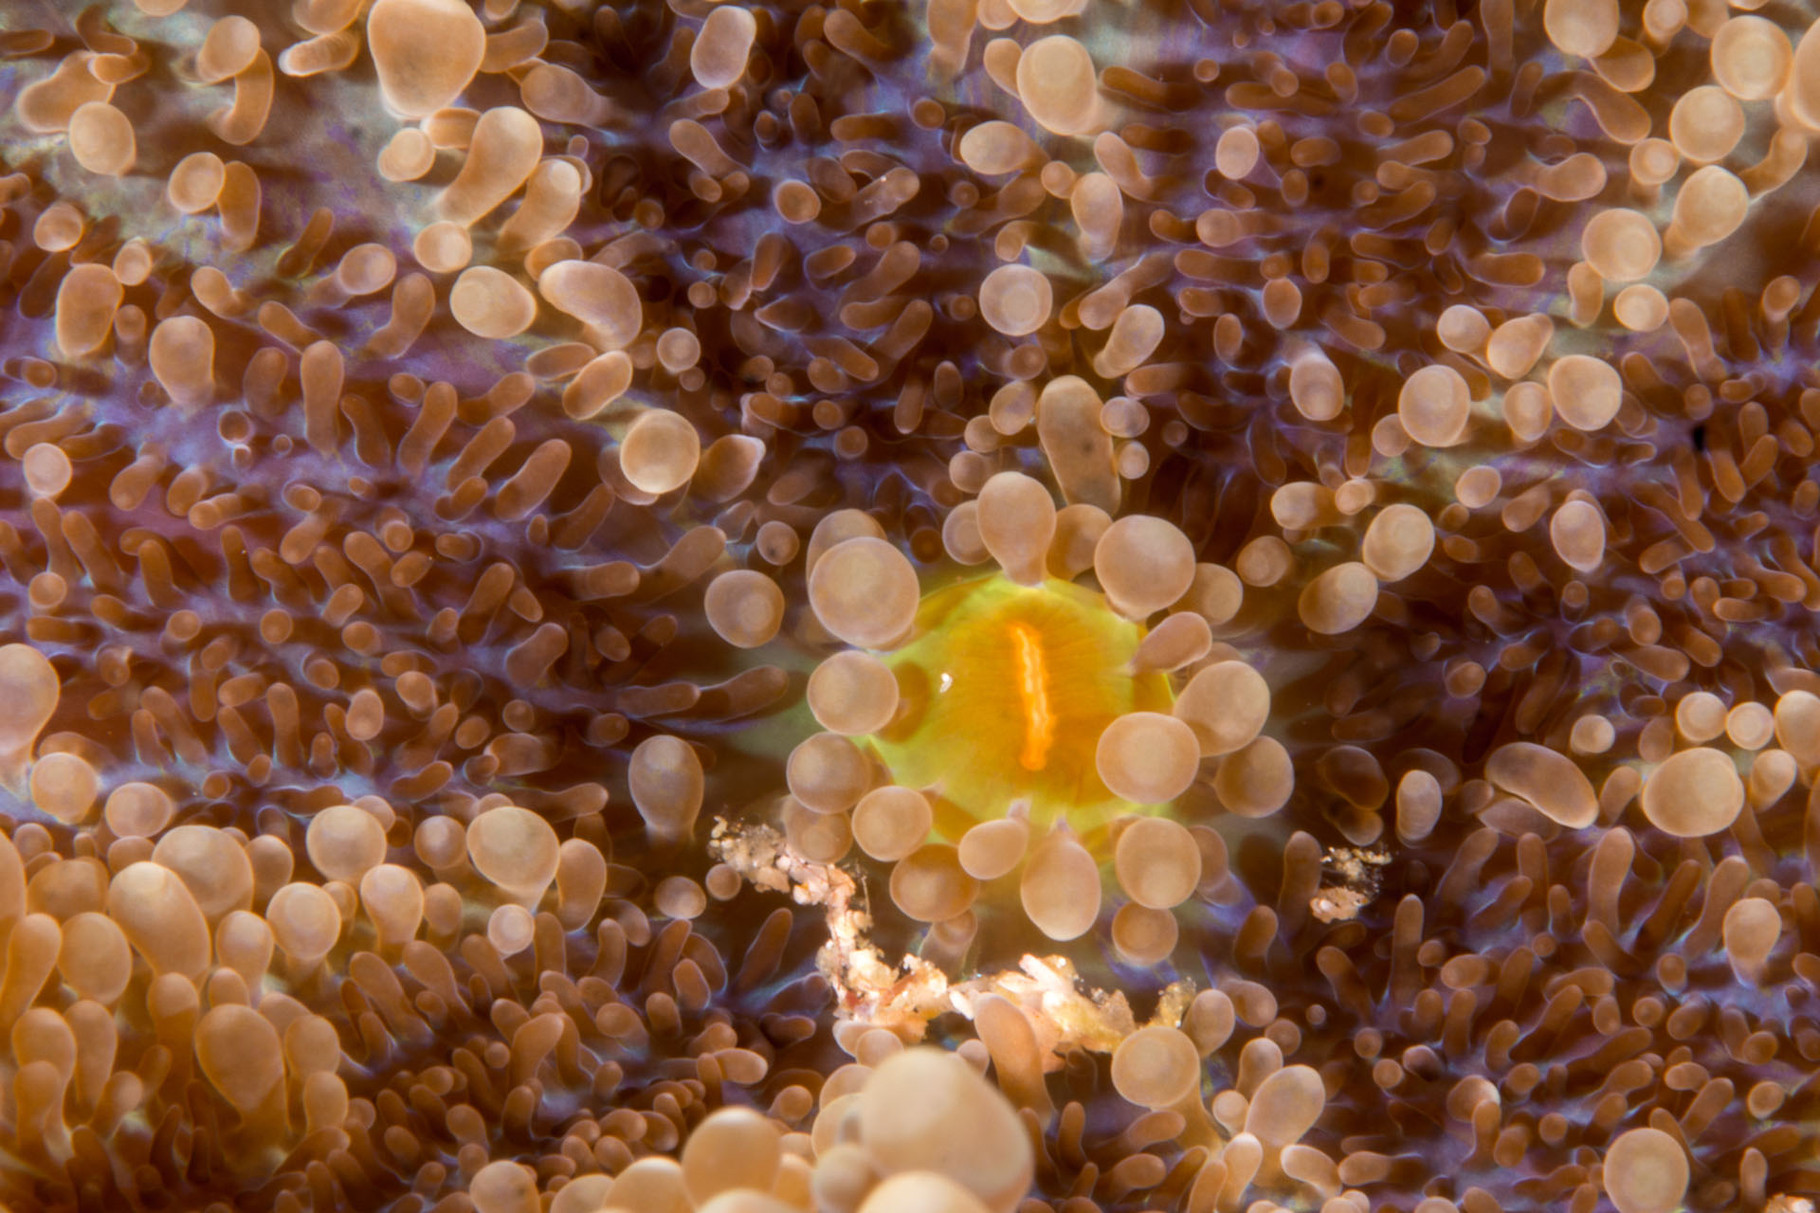 Close-up of an anemone